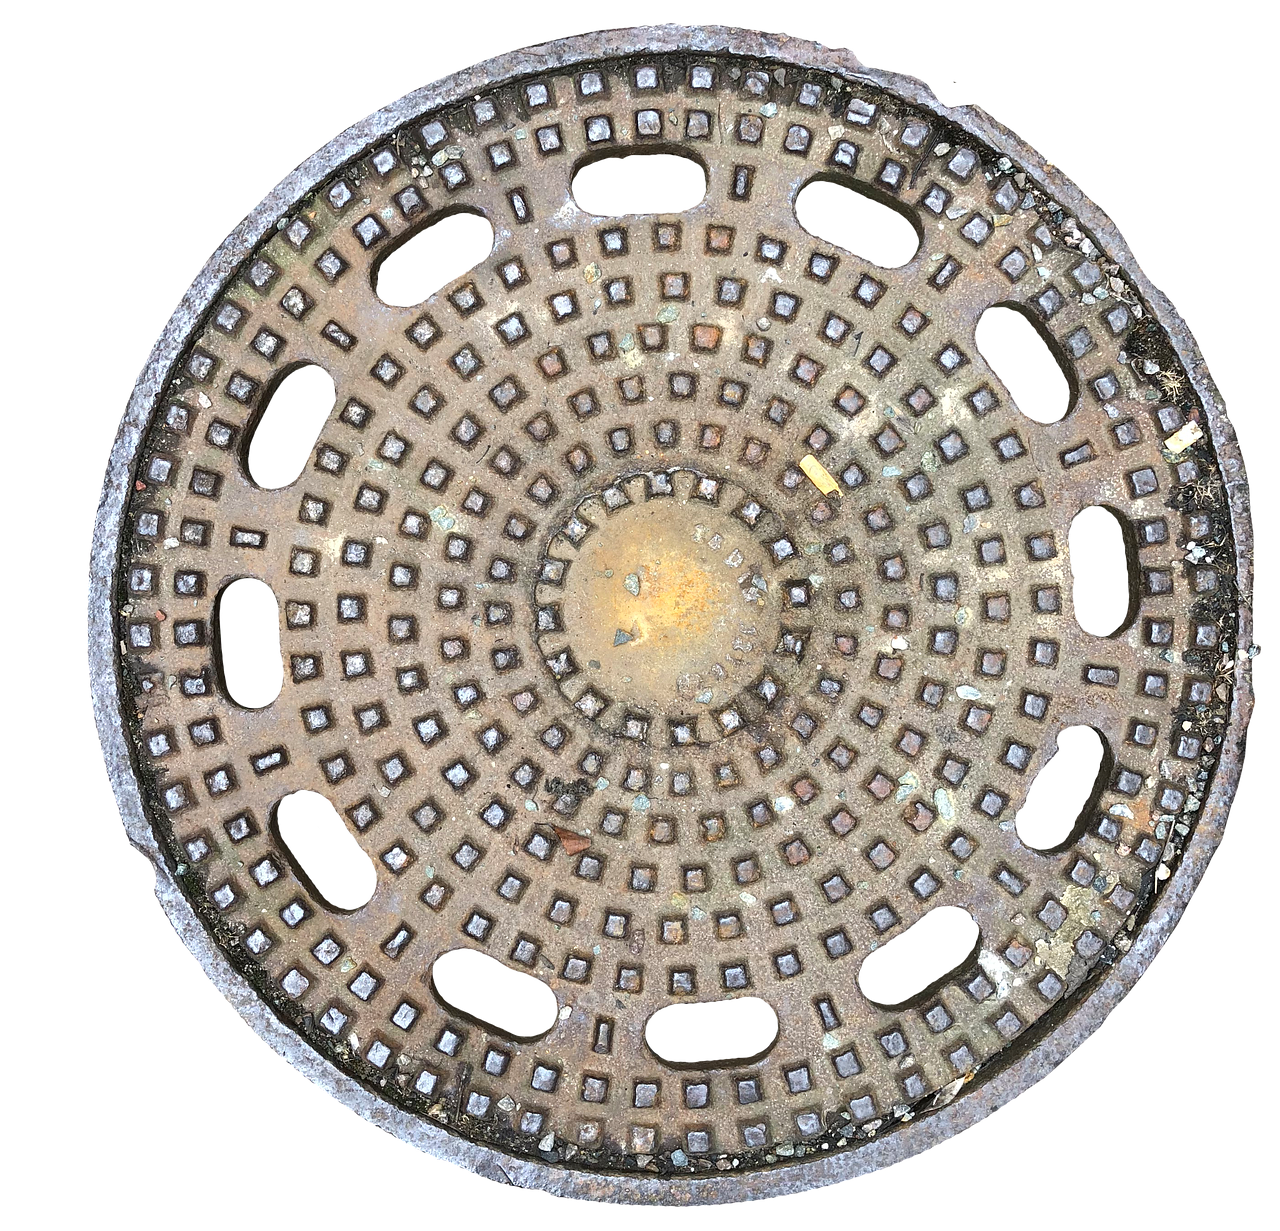 How to lift a manhole cover - Complete Guide